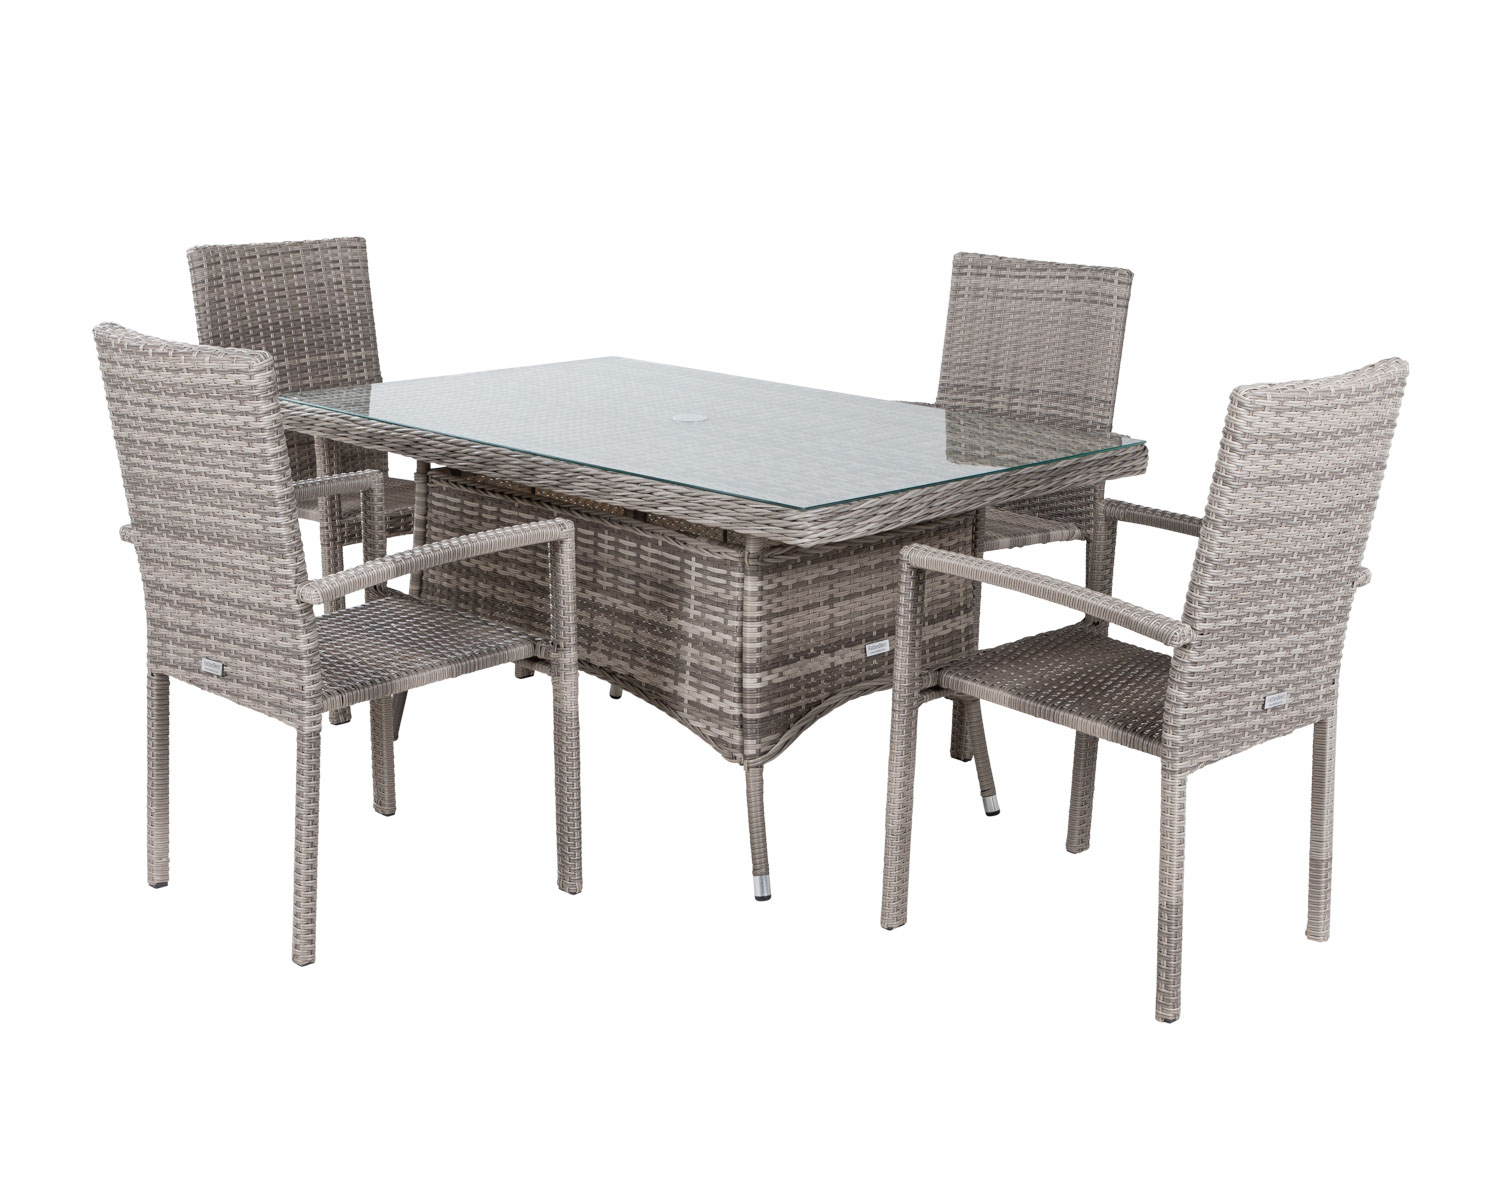 4 Seat Rattan Garden Dining Set With Small Rectangular Dining Table In Grey Rio Rattan Direct